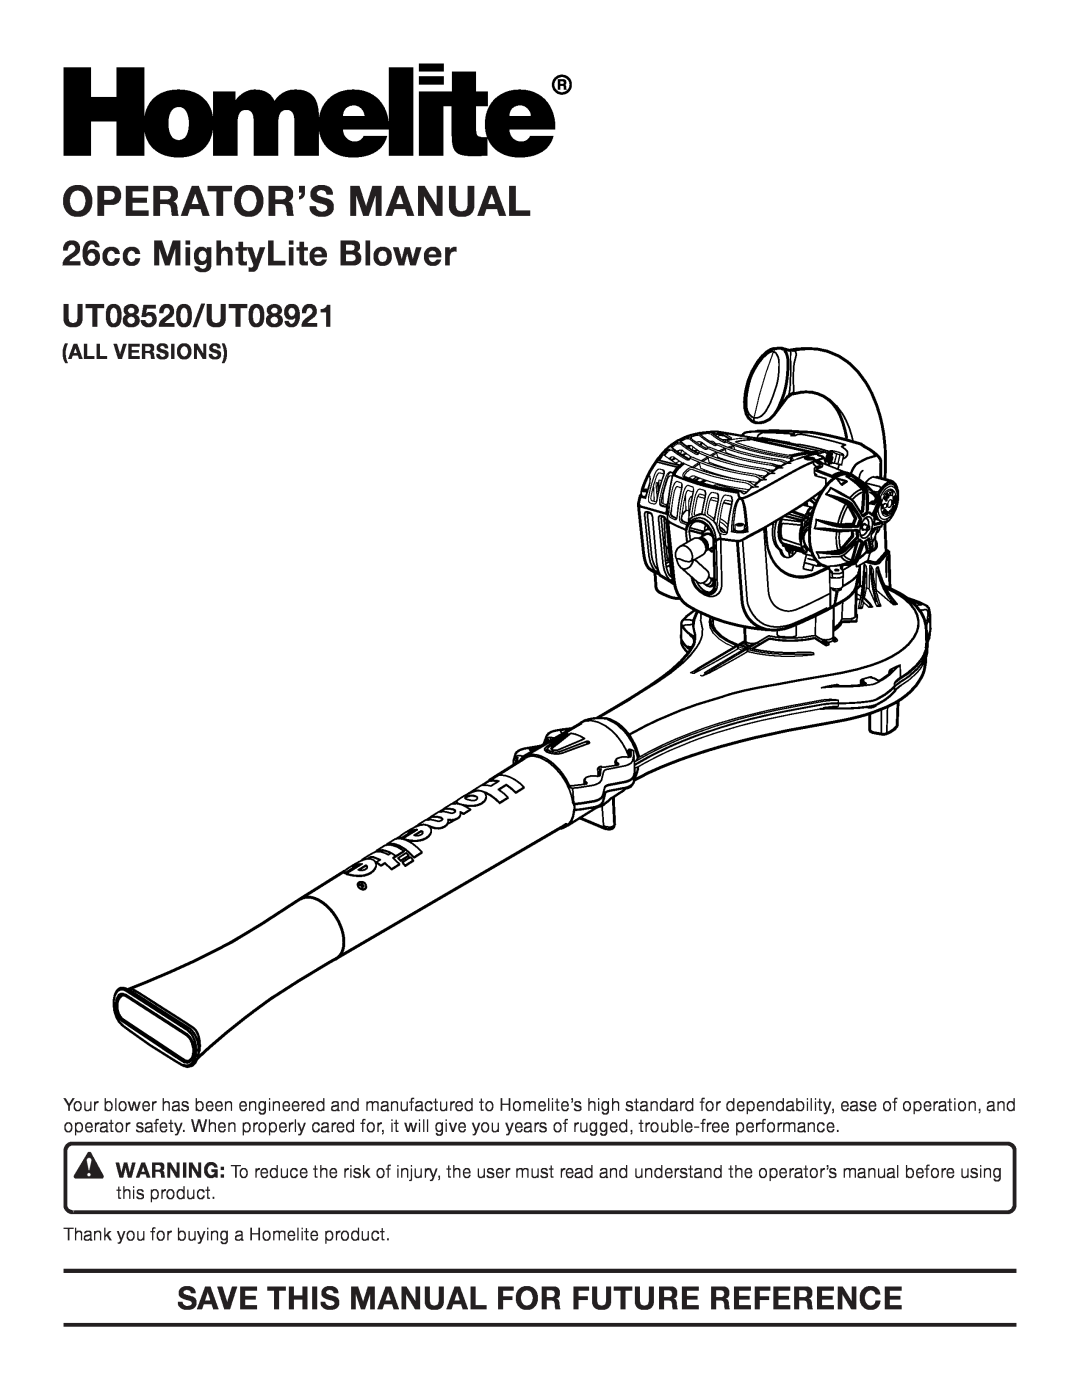 Homelite manual Operator’S Manual, 26cc MightyLite Blower, UT08520/UT08921, Save This Manual For Future Reference 